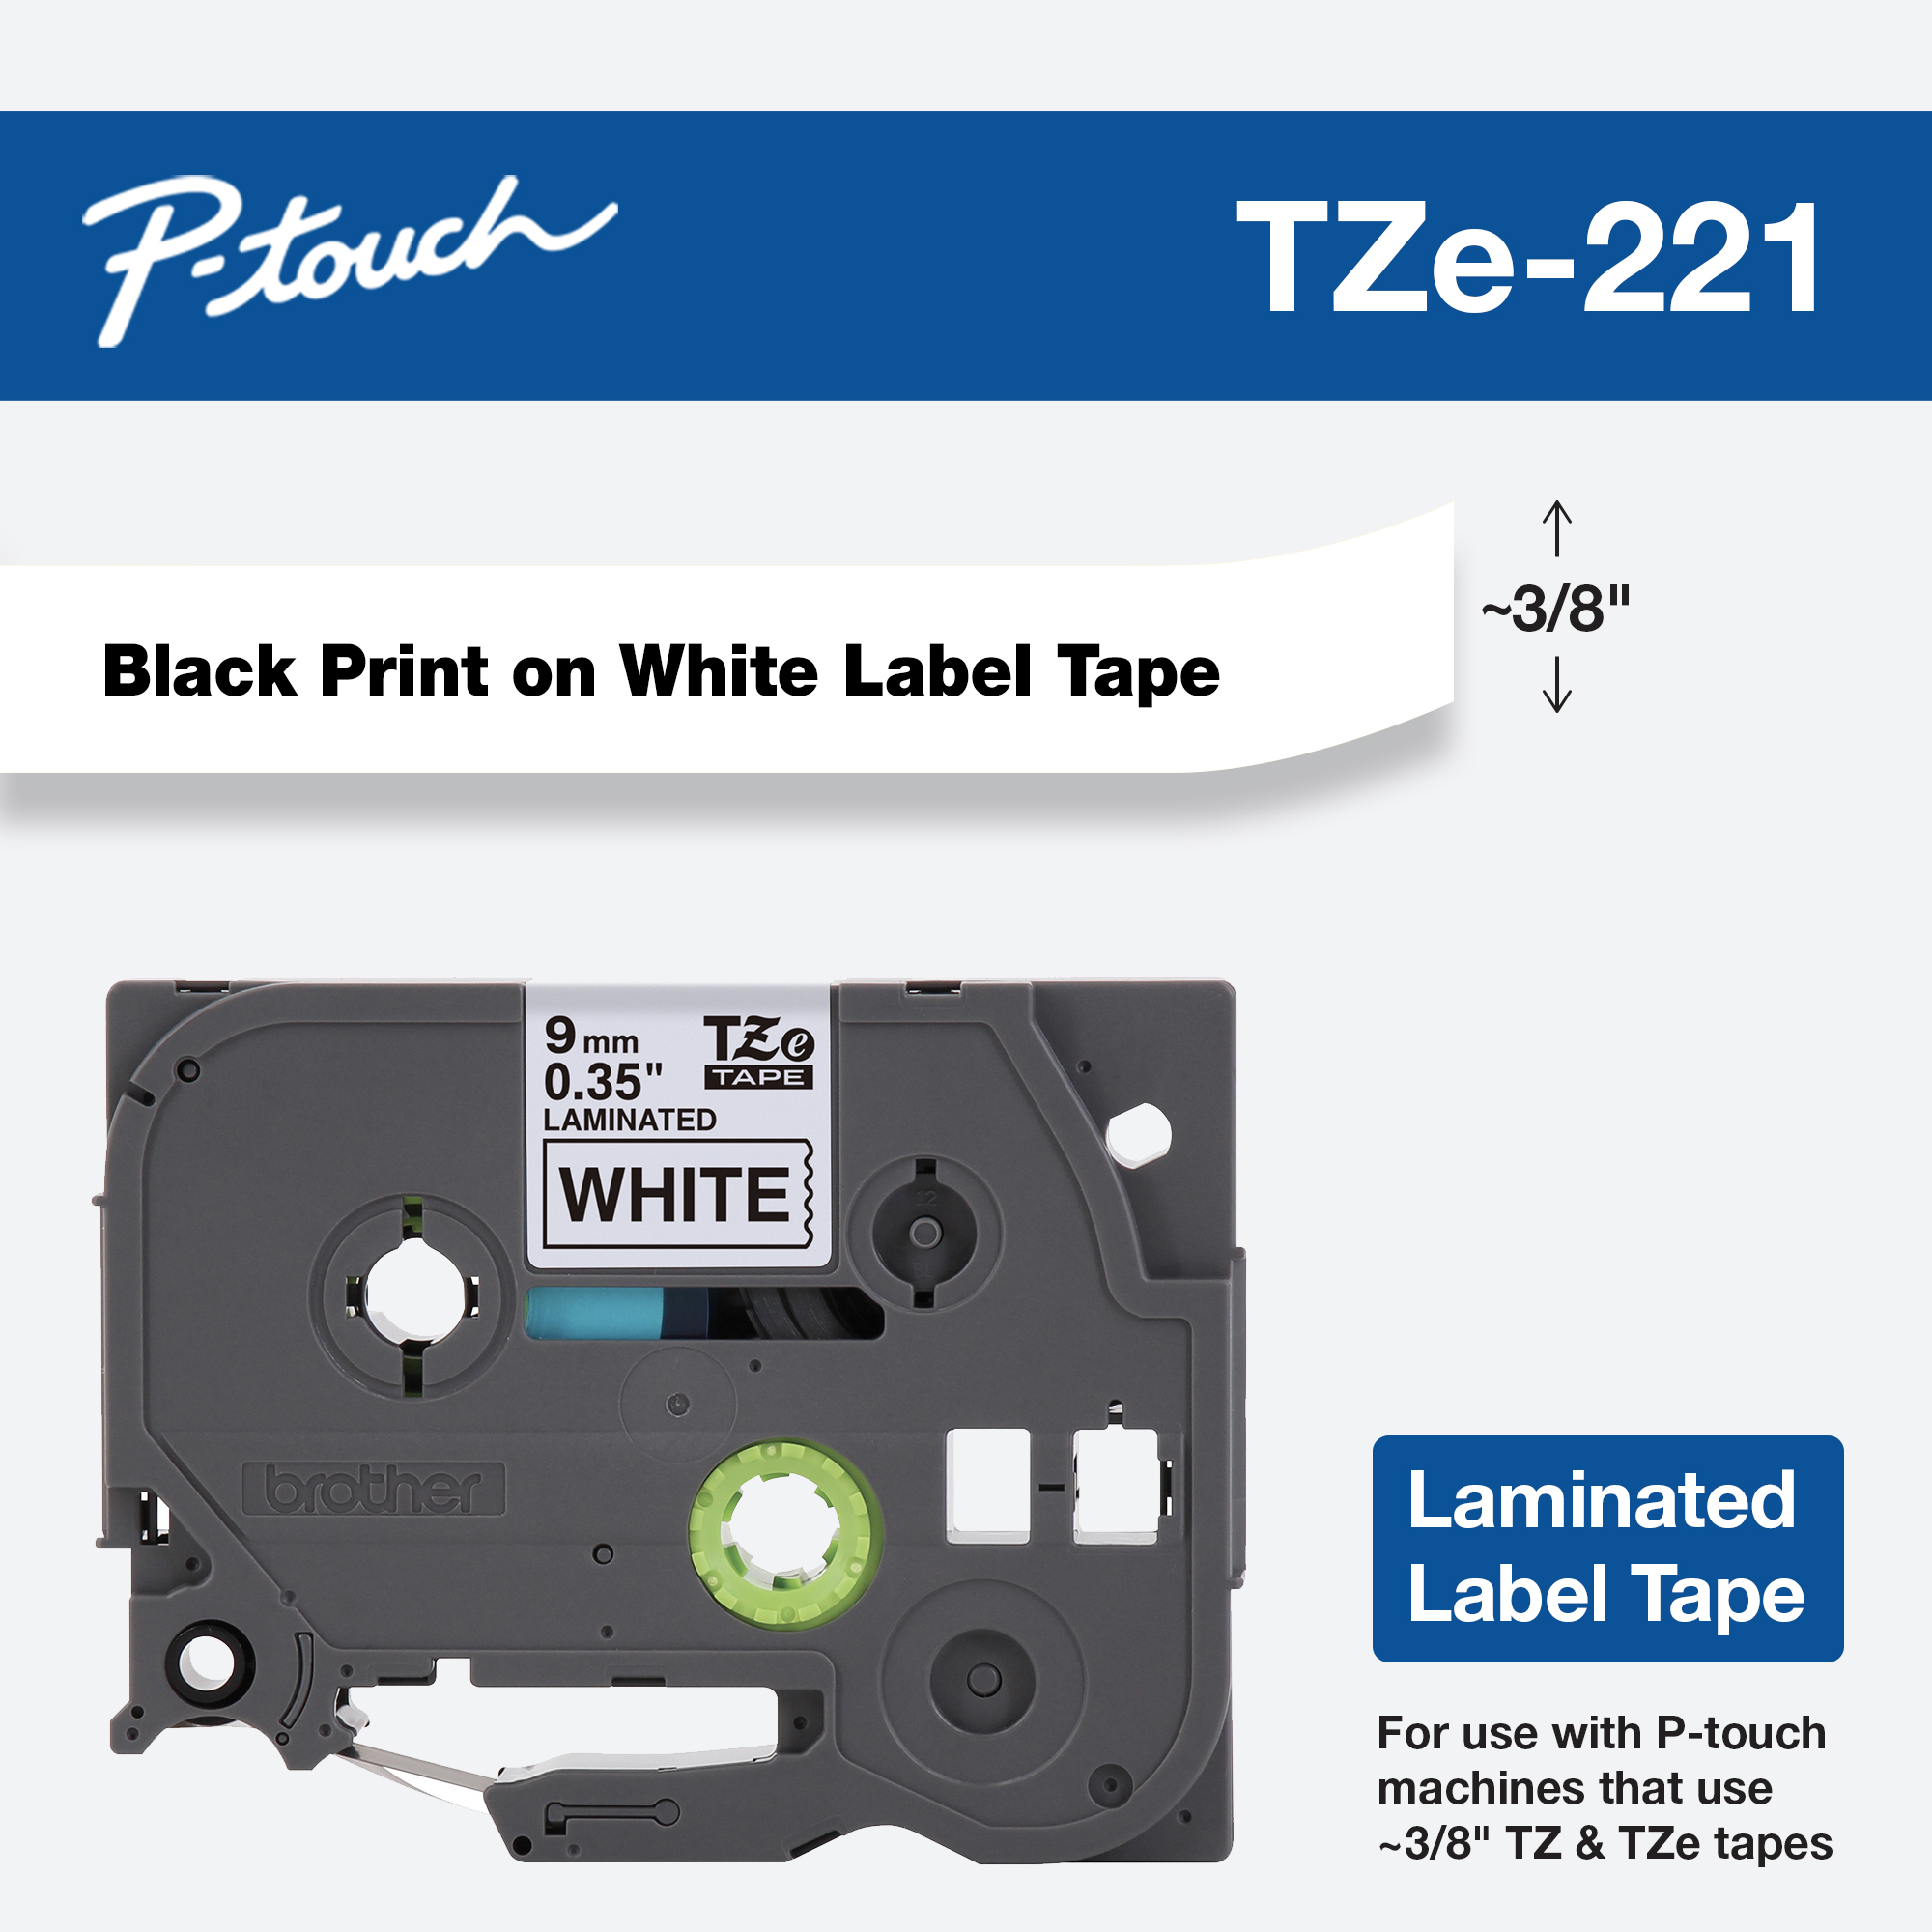 Brother Genuine P-touch TZE-221 Tape, 3/8" (0.35") Standard Laminated P-touch Tape, Black on White, Laminated for Indoor or Outdoor Use, Water Resistant, 26.2 Feet (8M), Single-Pack - image 1 of 10